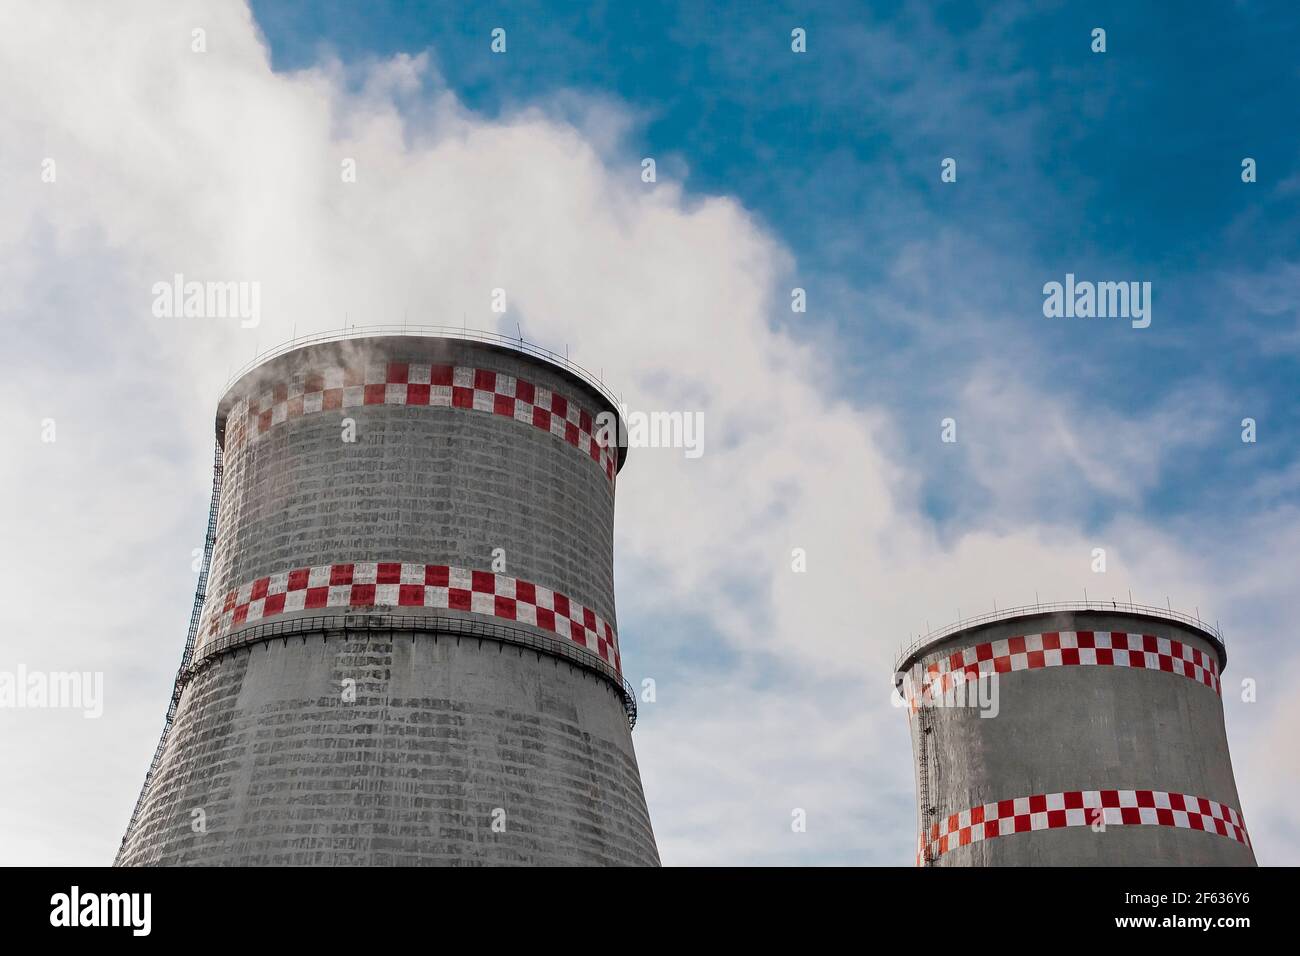 Cooling tower of an industrial plant or thermal power plant against a blue sky. Stock Photo